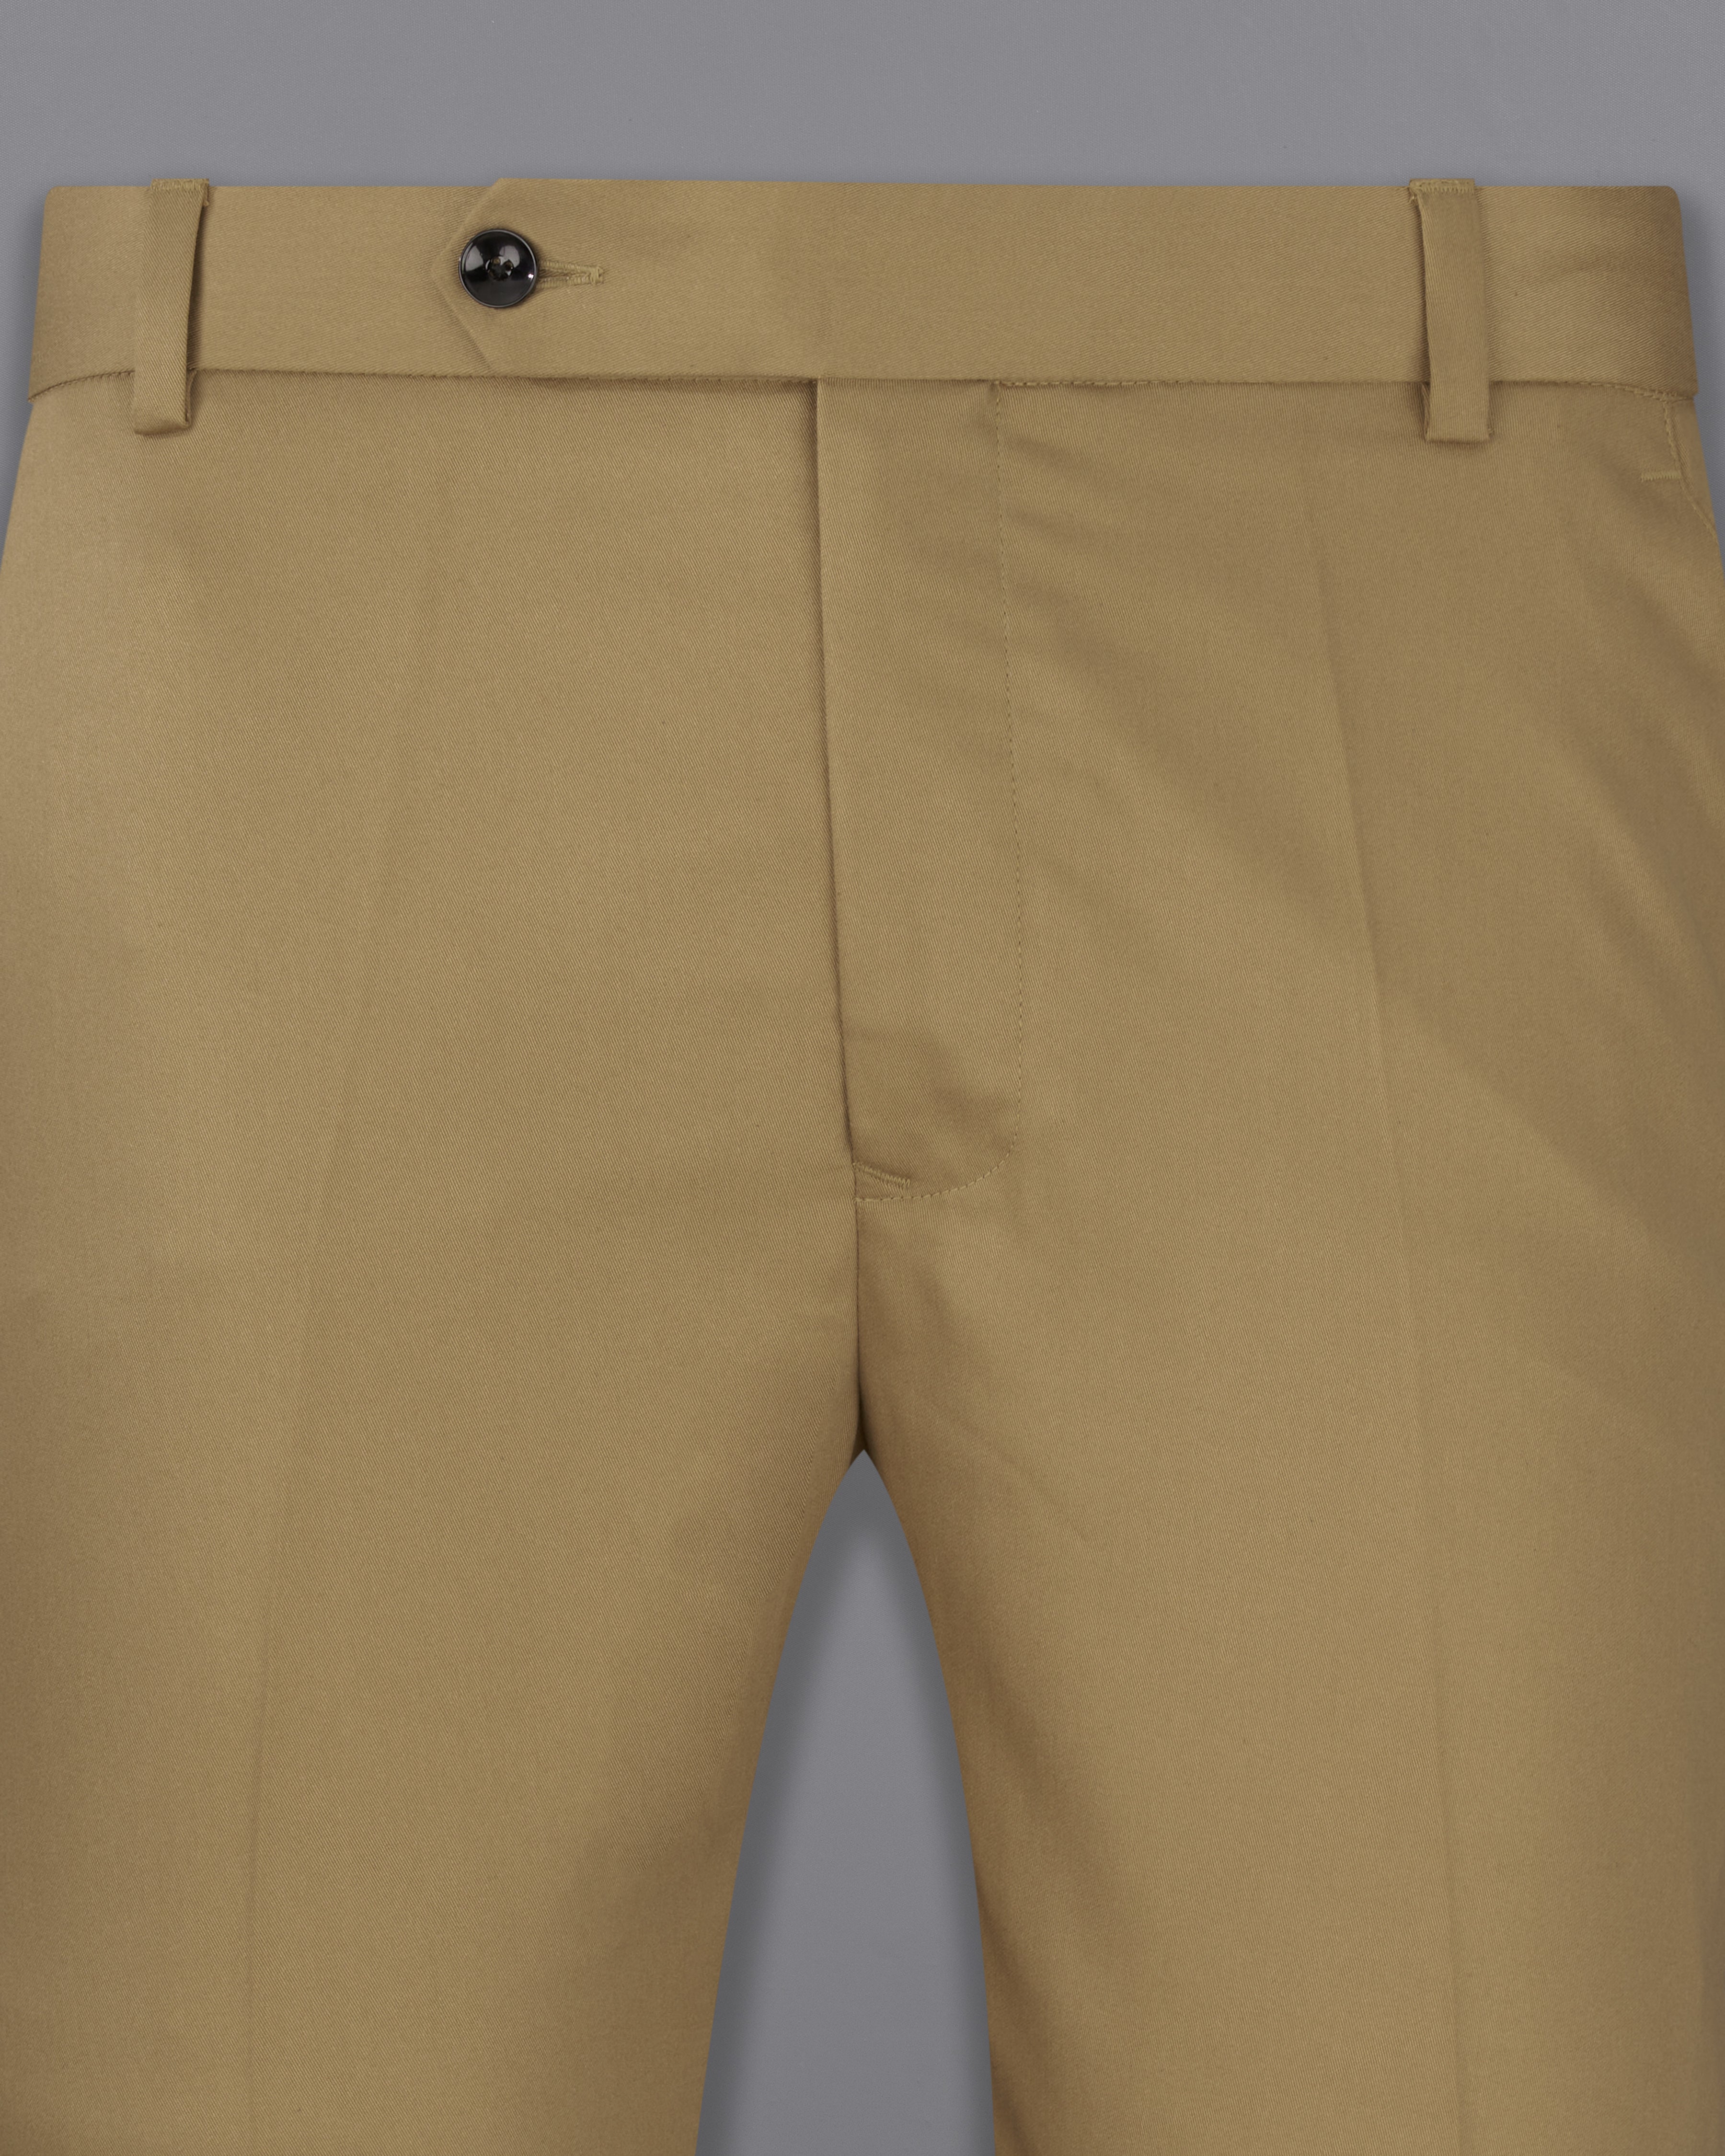 Clay Creek Brown Solid  Pant T2330-28, T2330-30, T2330-32, T2330-34, T2330-36, T2330-38, T2330-40, T2330-42, T2330-44